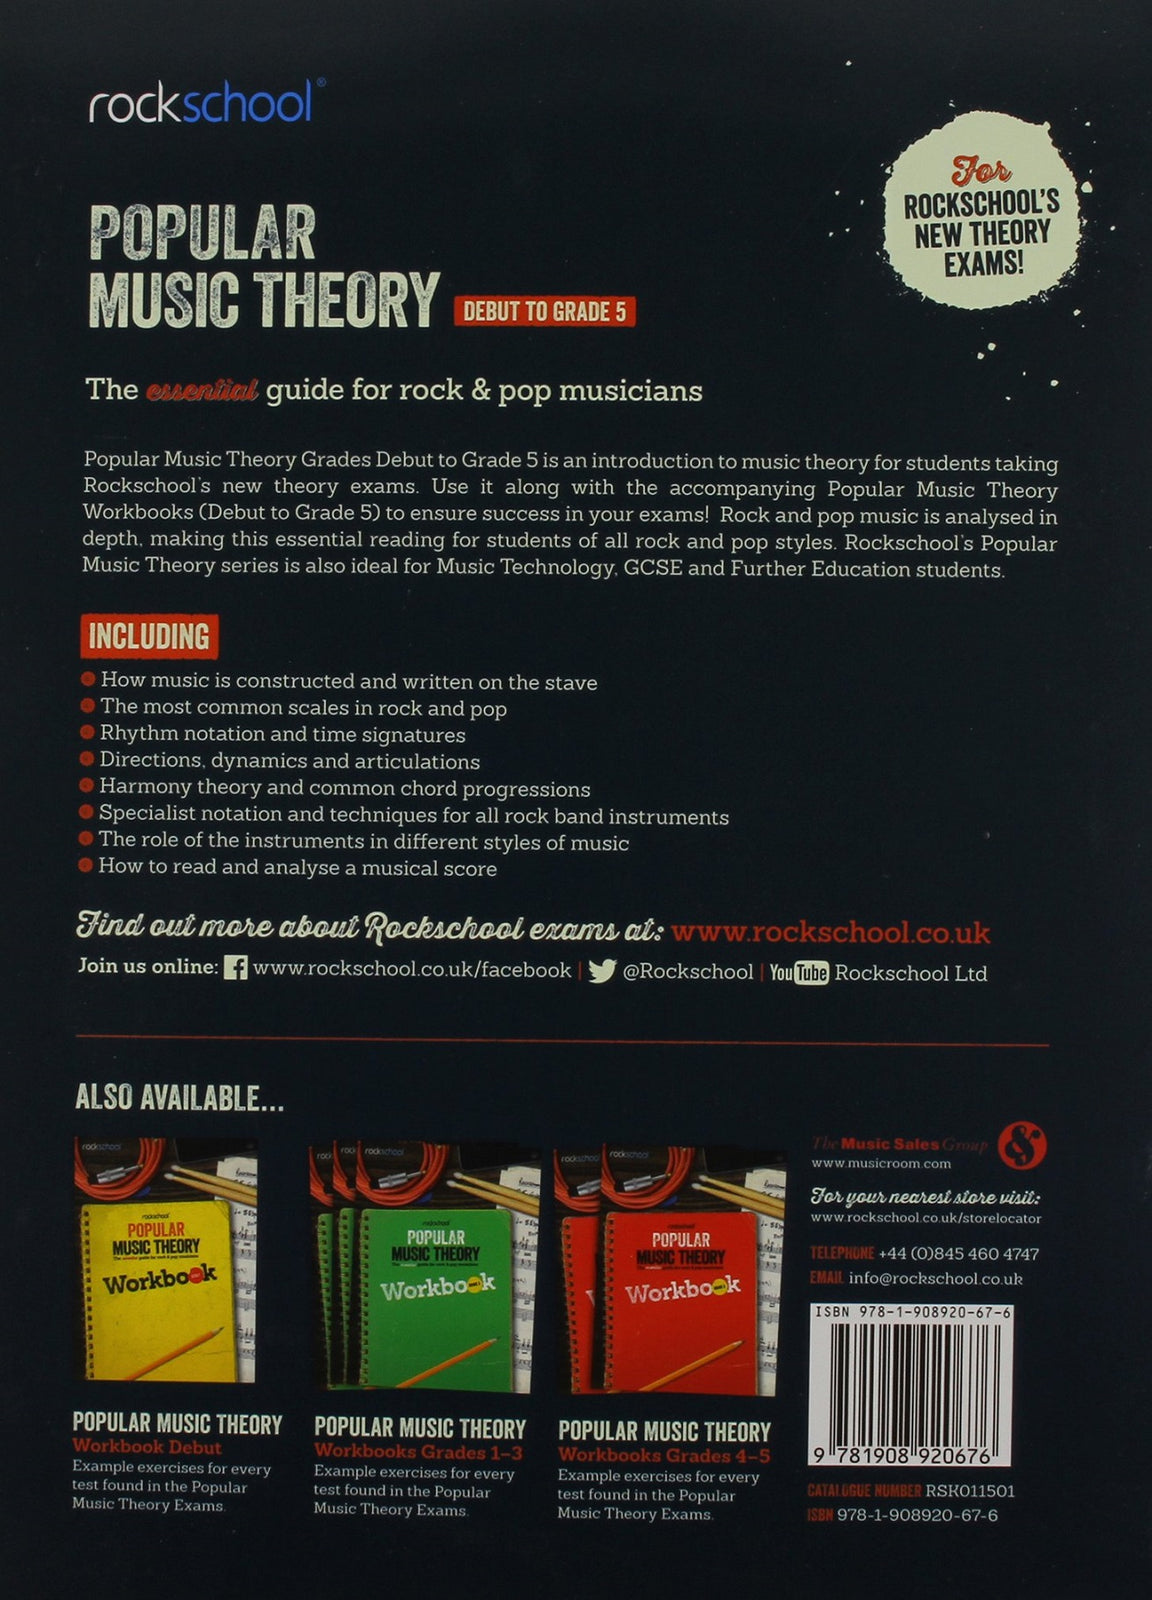 Rockschool Popular Music Theory - Essential Guide for Debut to G5